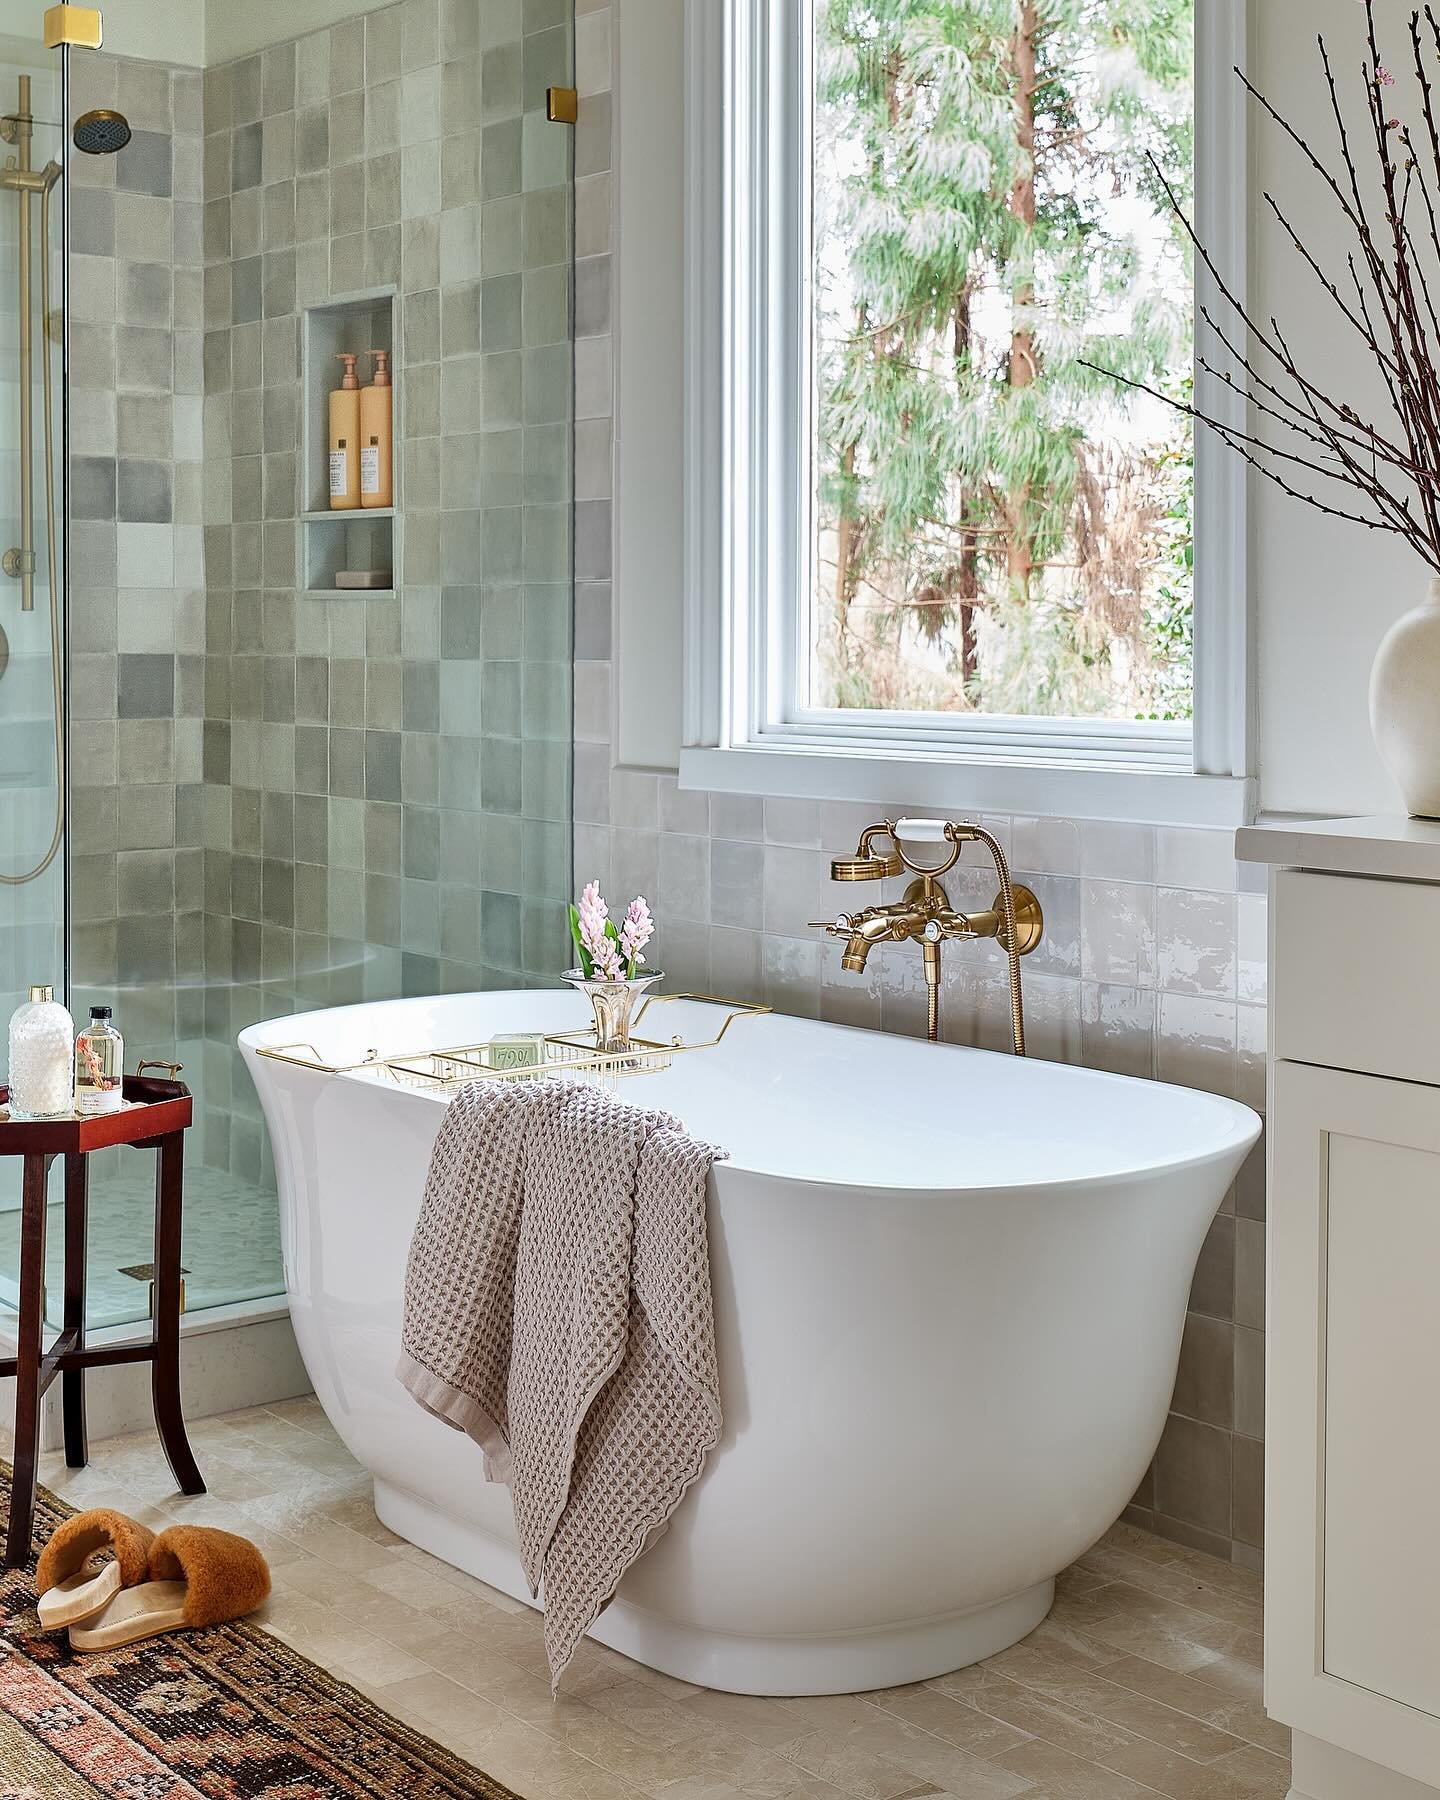 We are so happy that our clients are finally enjoying their newly renovated primary bathroom retreat 🤍 This elegant freestanding tub with a gorgeous brass faucet makes a stunning statement in our #TheRidgeProject. Ahhhh to enjoy a dreamy relaxing so